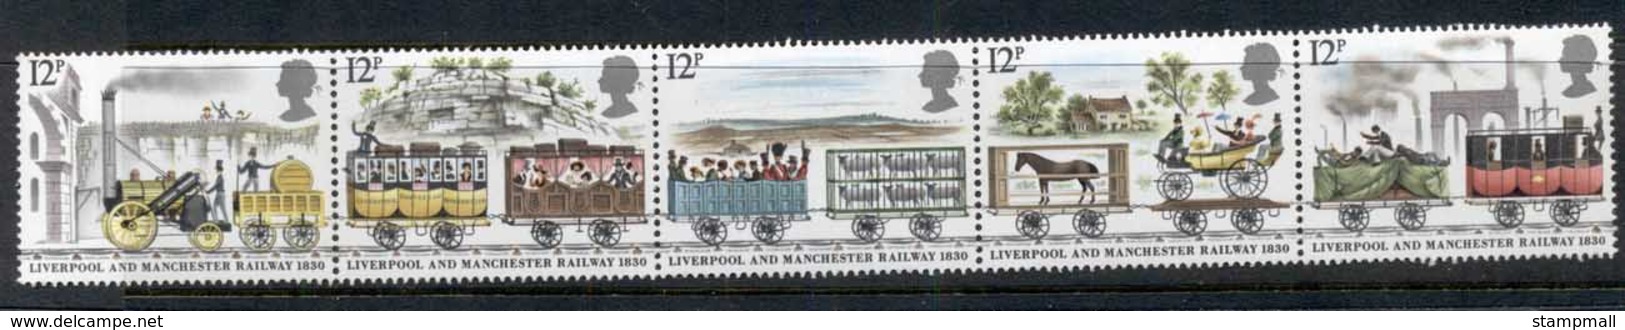 GB 1980 Liverpool & Manchester Railway MUH - Unclassified